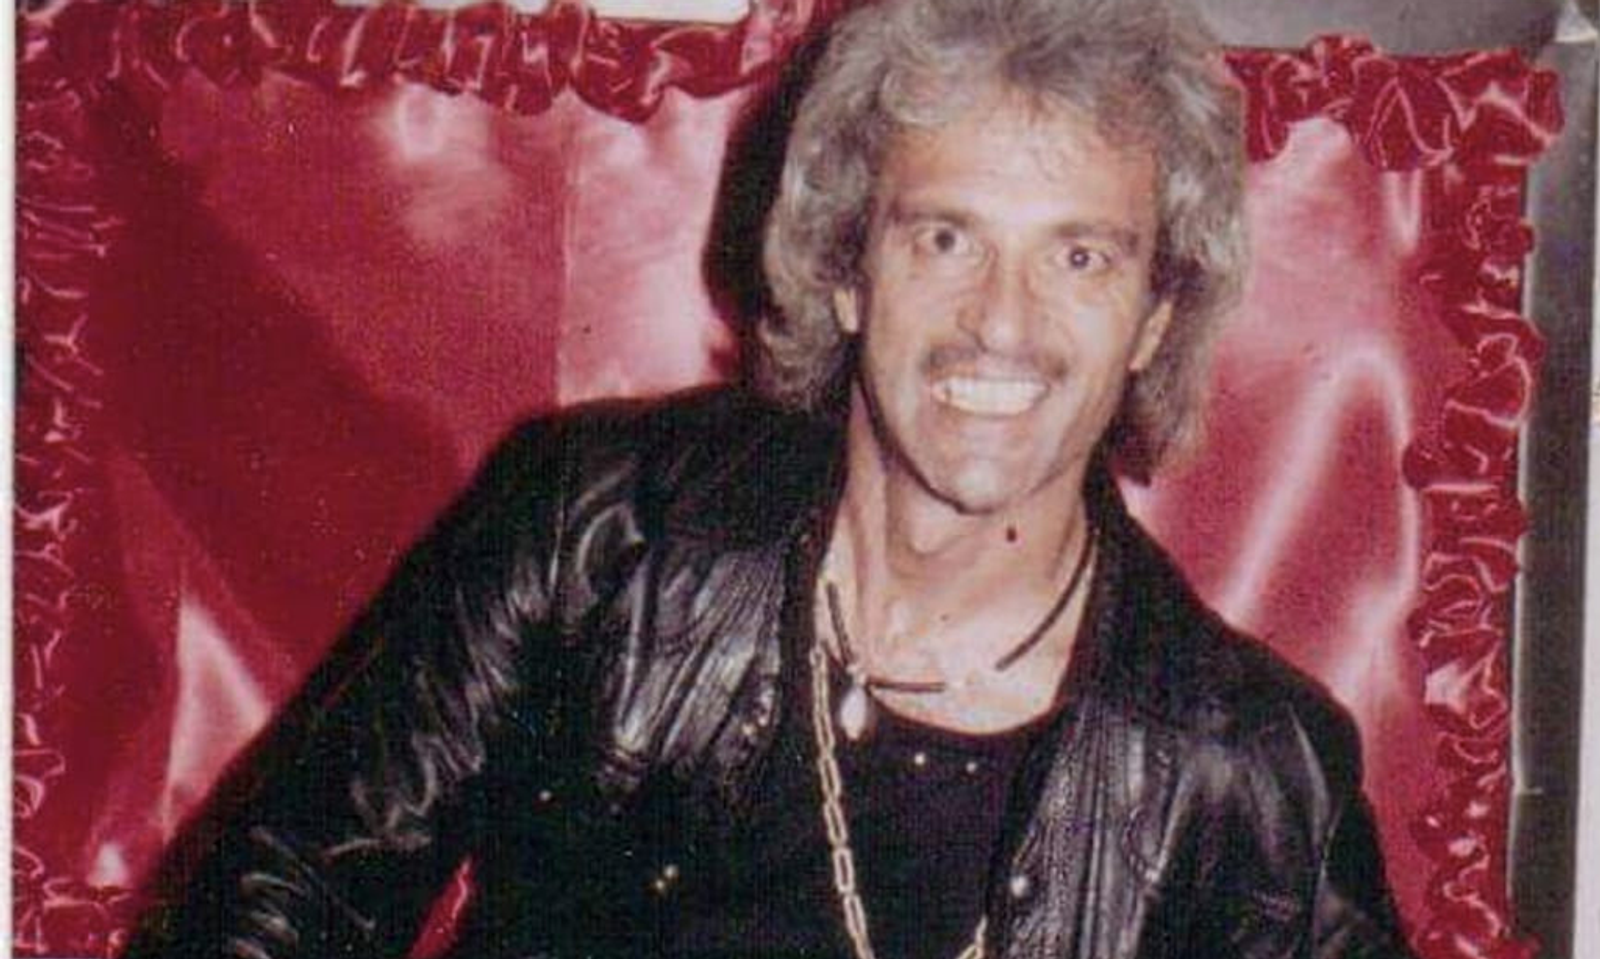 Golden Age Performer Jose Duval Dies at 82